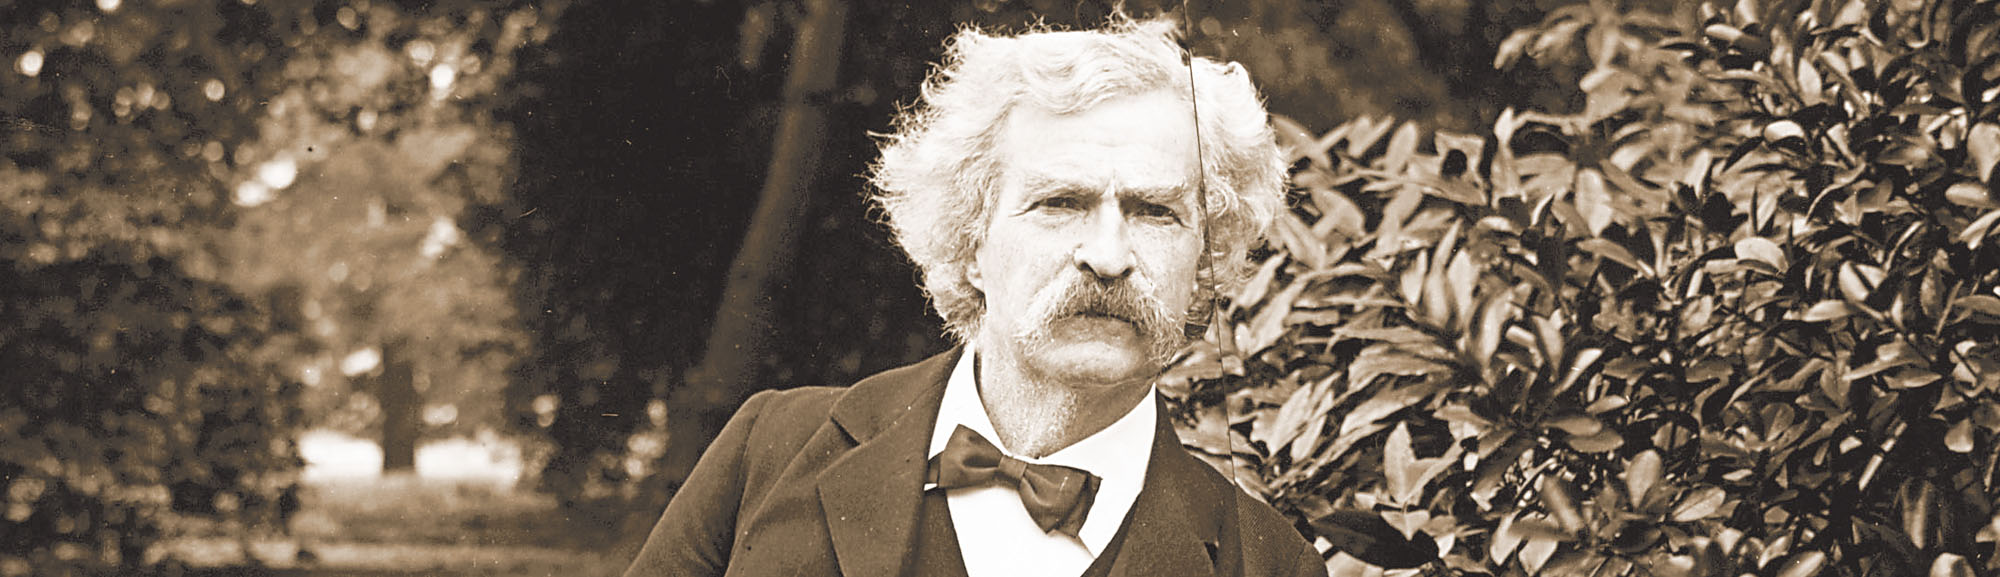 Audiobook Review| How Not to Get Rich: The Financial Misadventures of Mark Twain